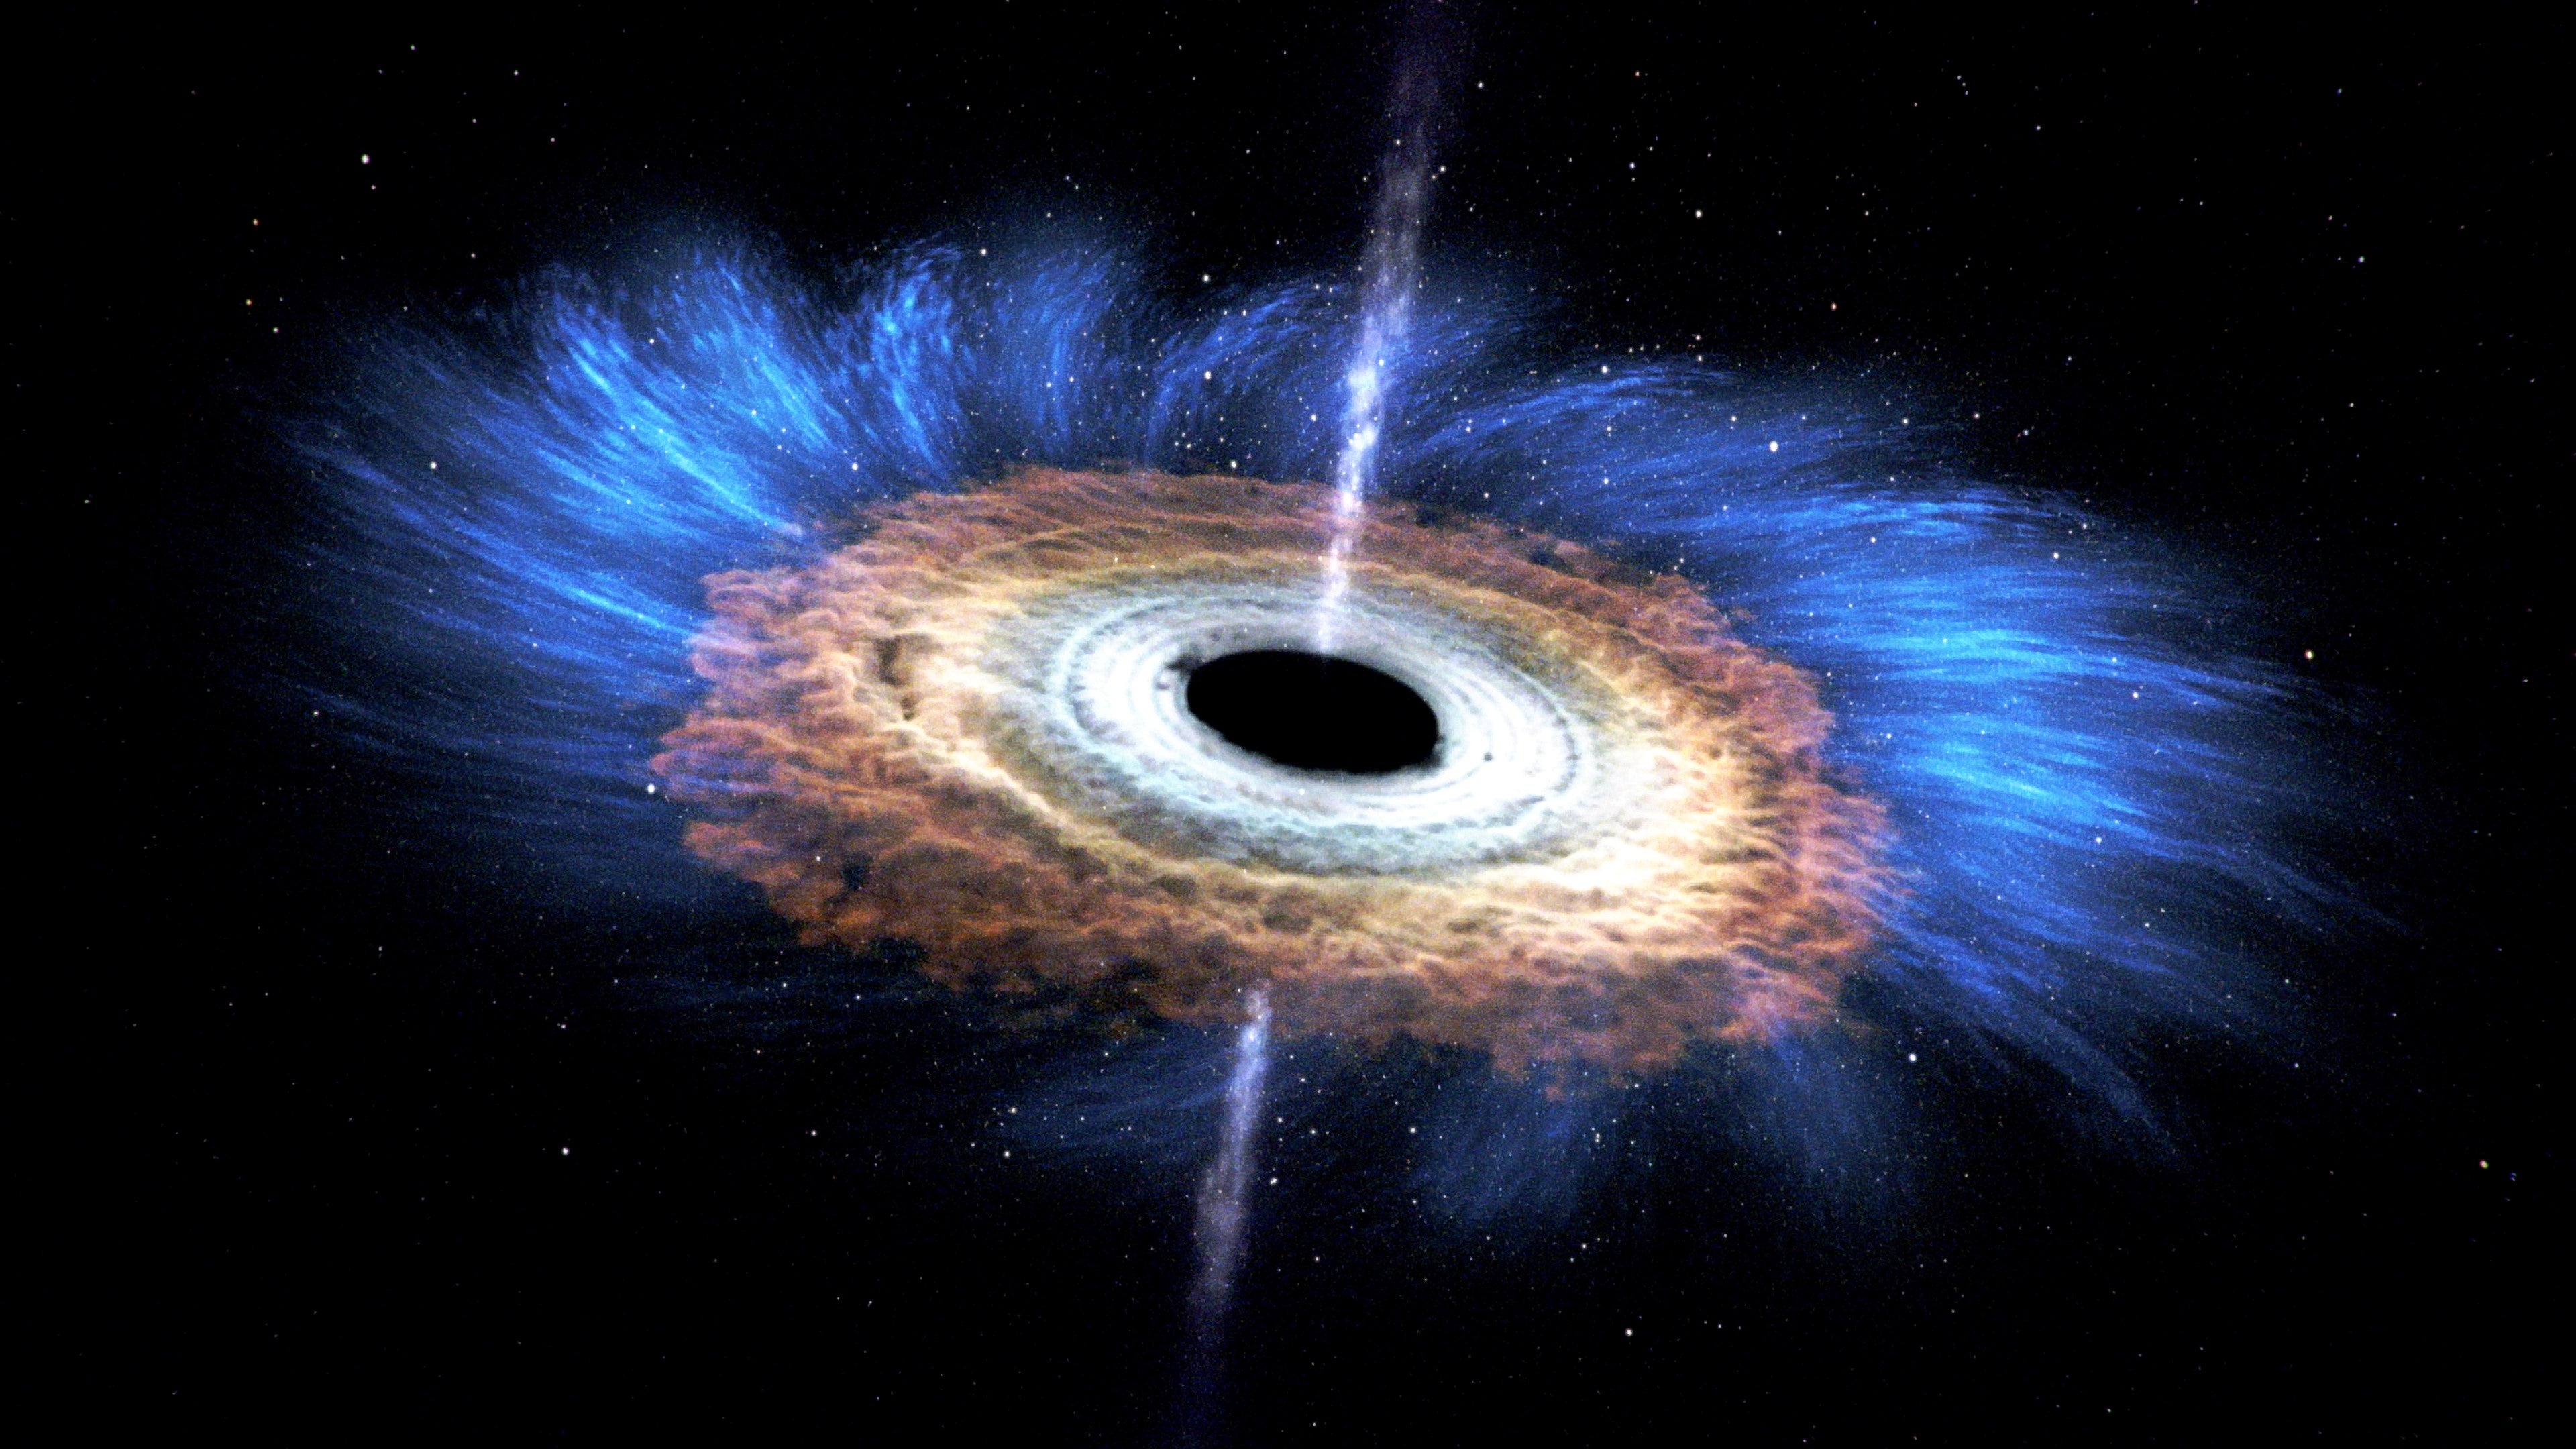 Event suggests birth of black hole.